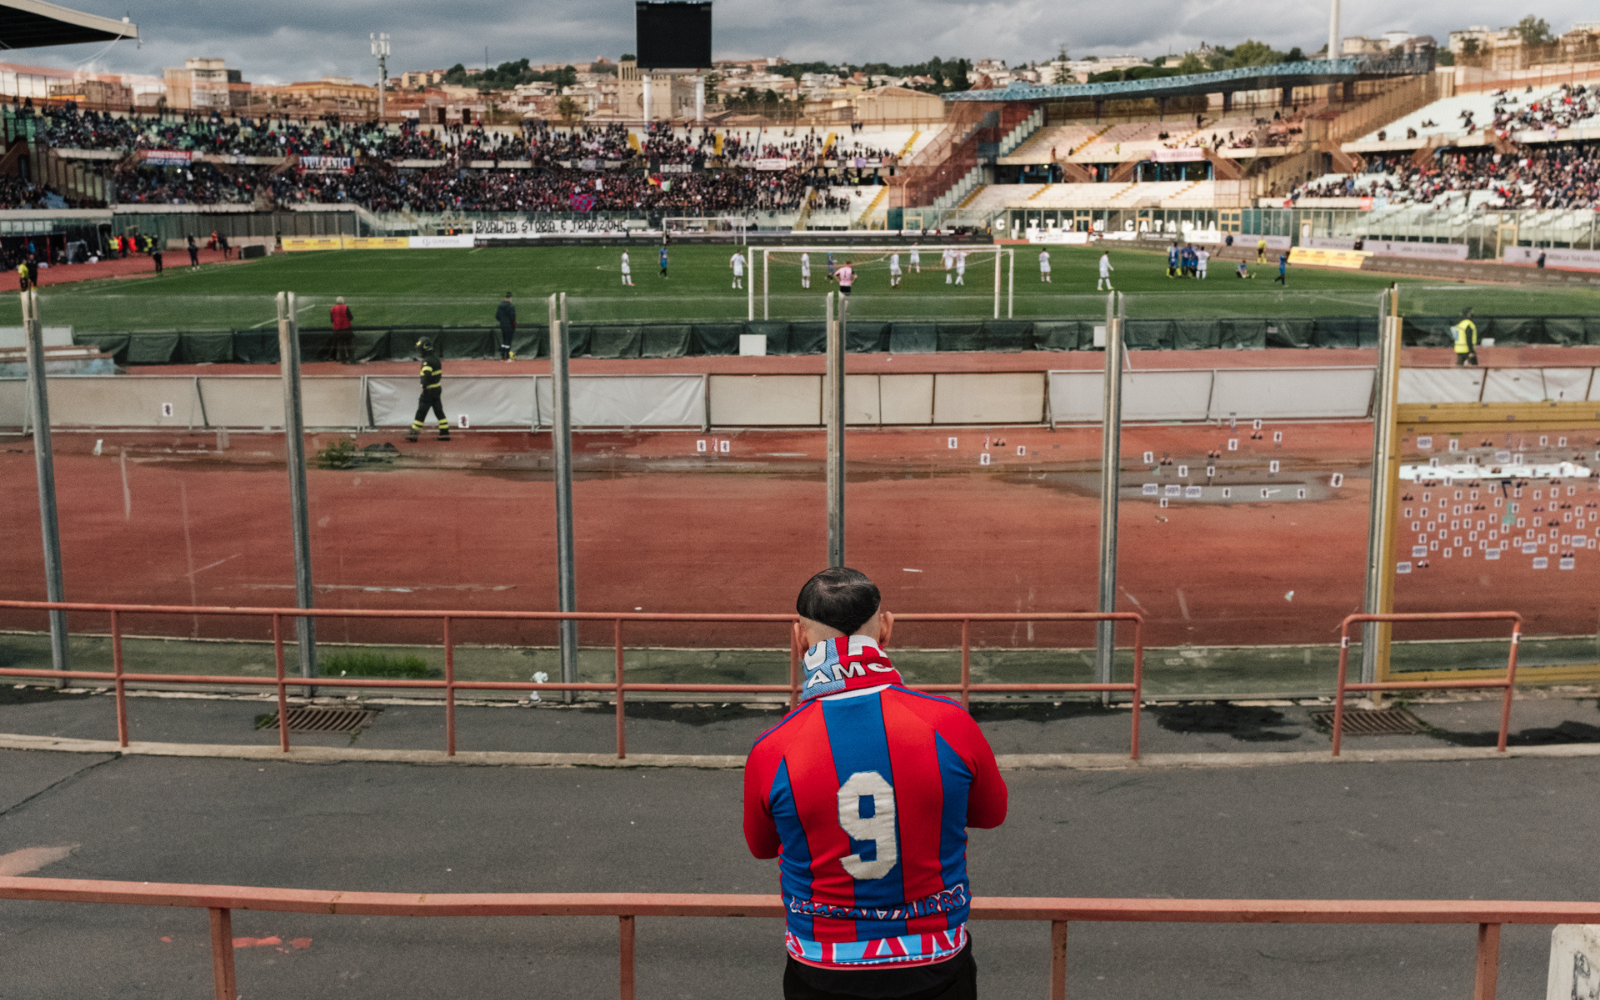 The derby between Catania and Palermo is a derby that goes beyond the category We went to the Massimino stadium in Catania to watch the match accompanied by Marco Biagianti